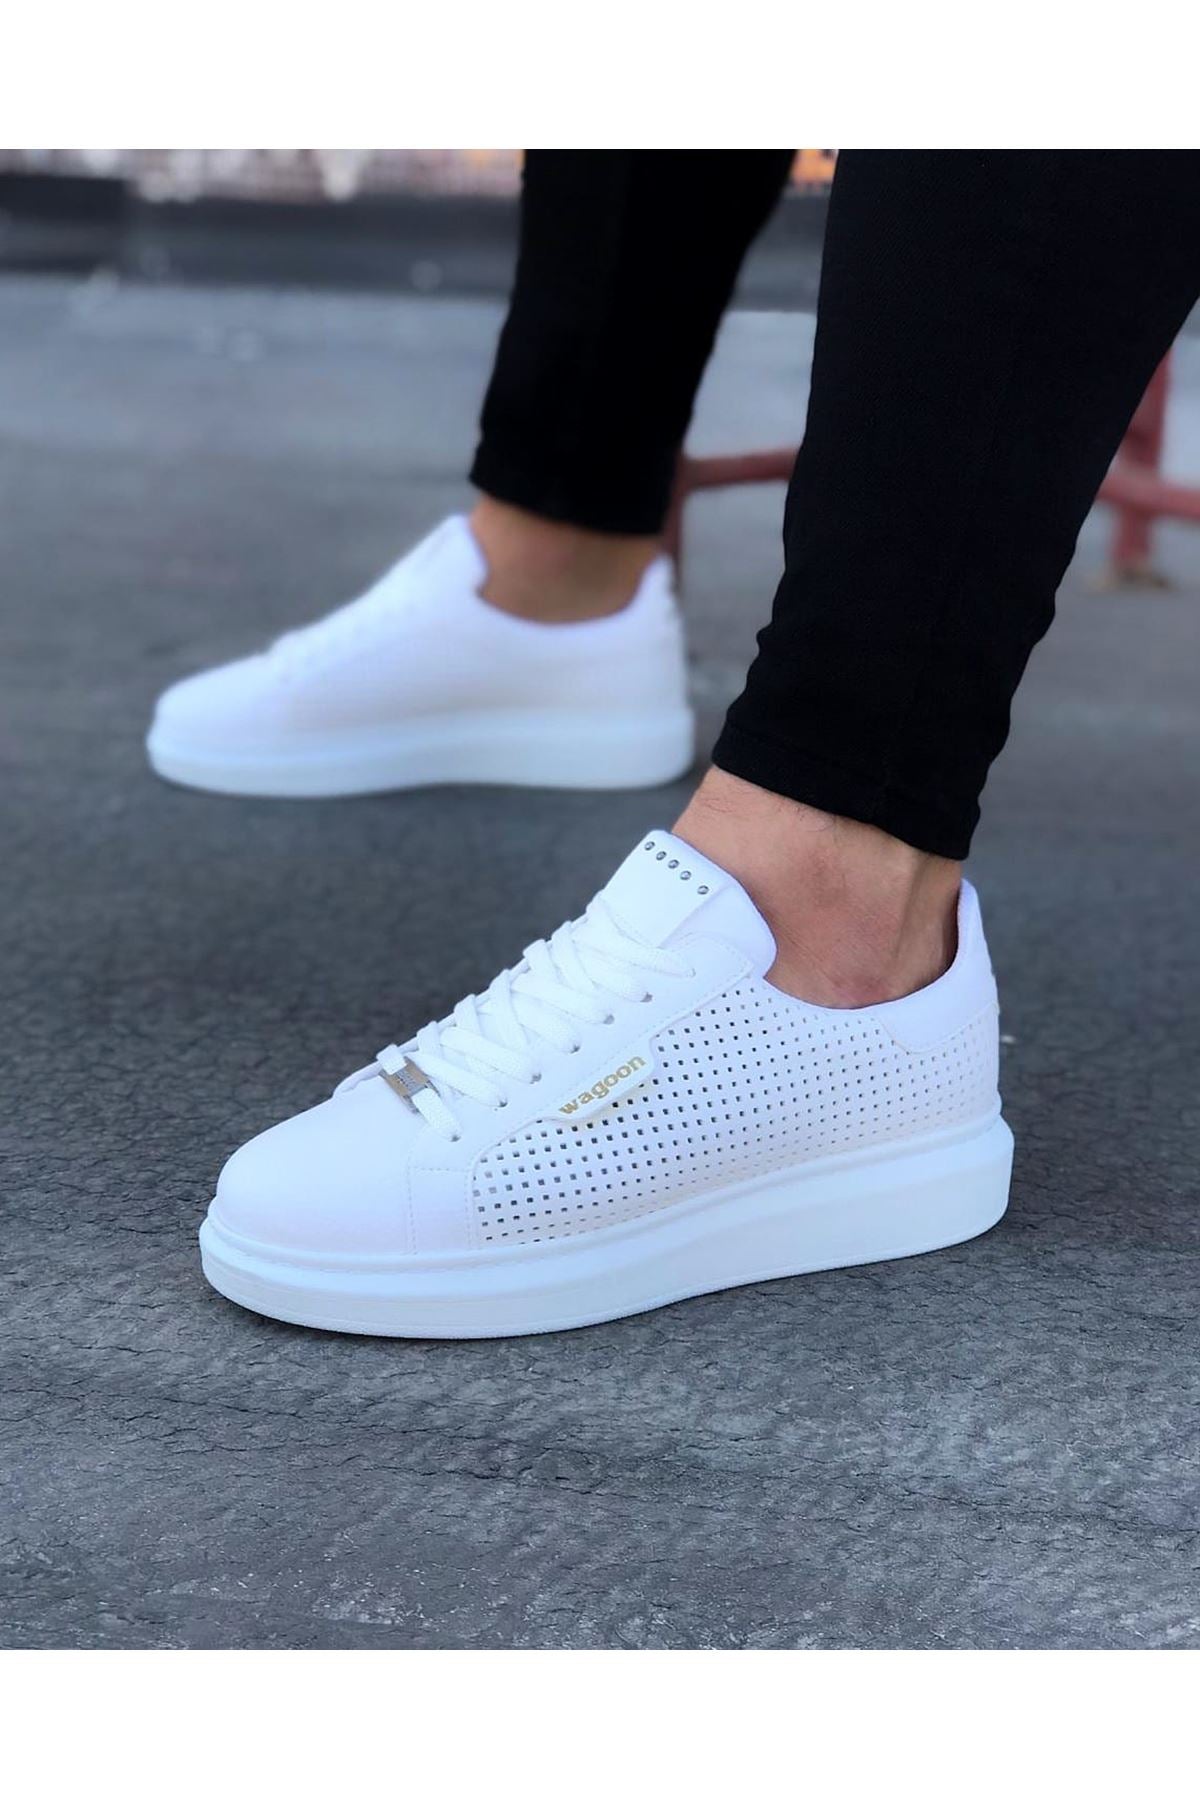 WG01 White Perforated Men's High-Sole Shoes sneakers - STREETMODE ™